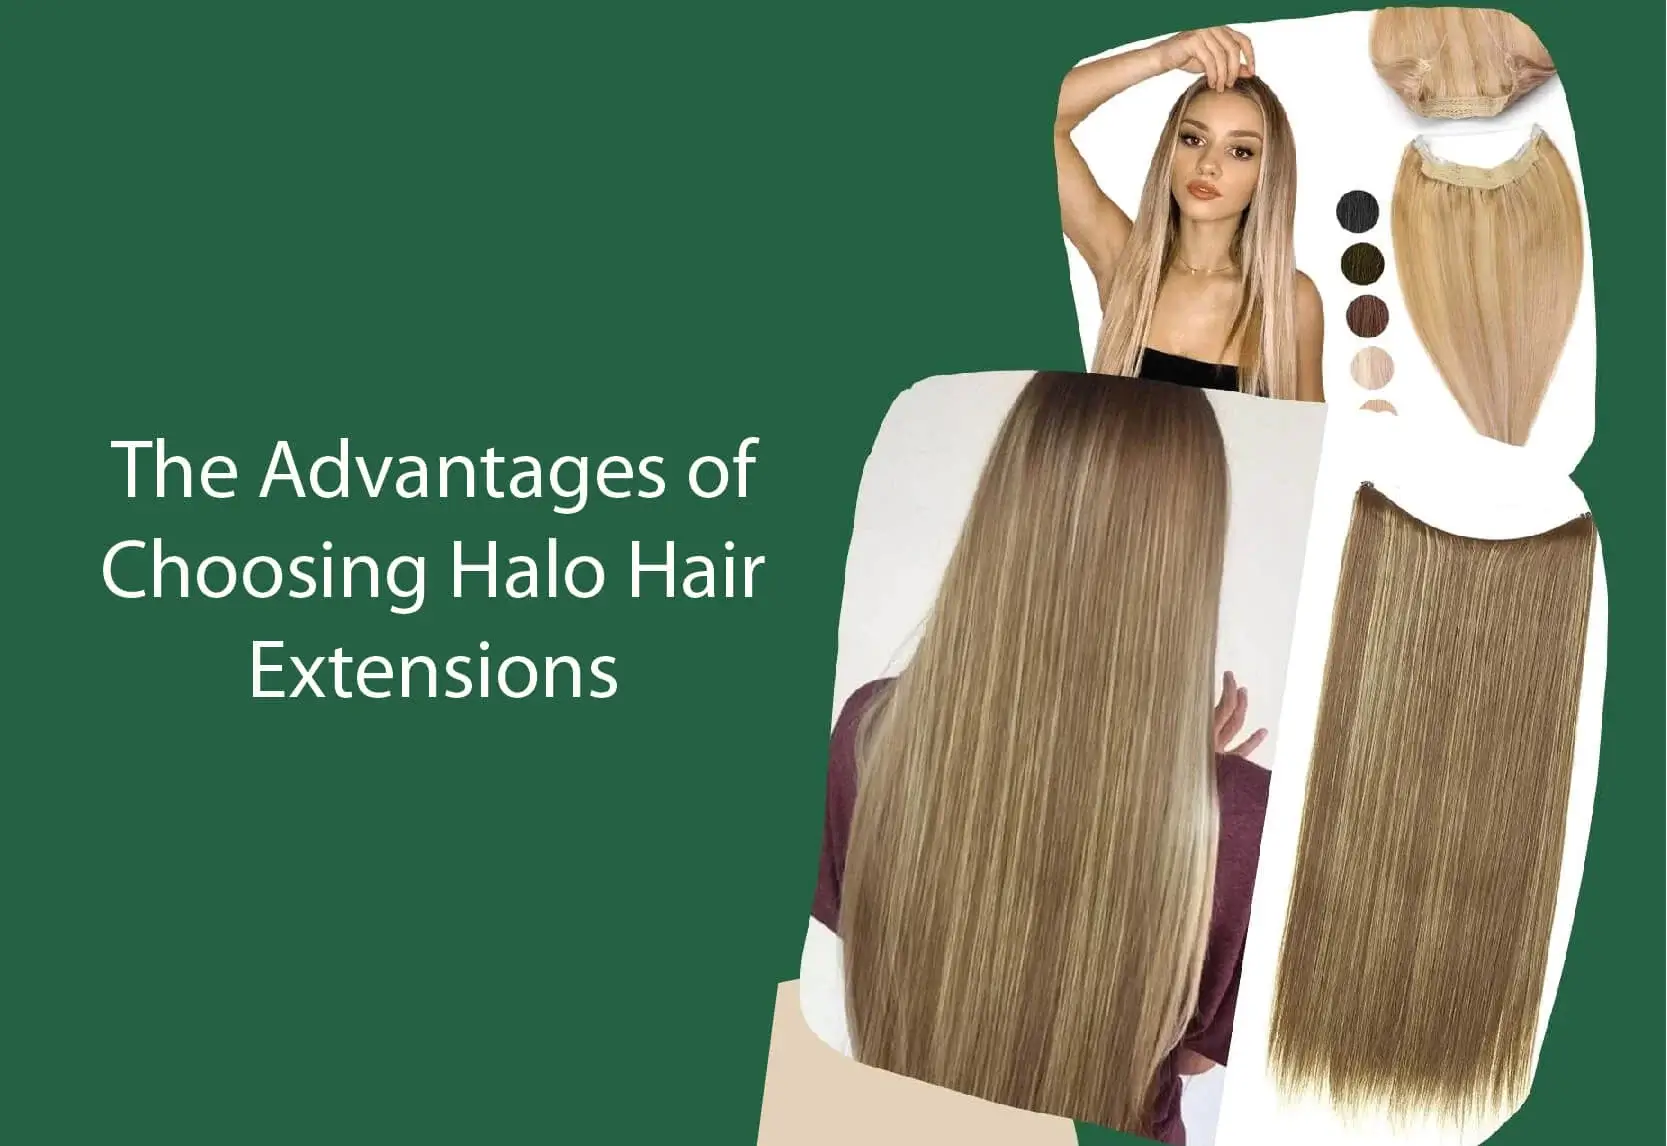 The Advantages of Choosing Halo Hair Extensions